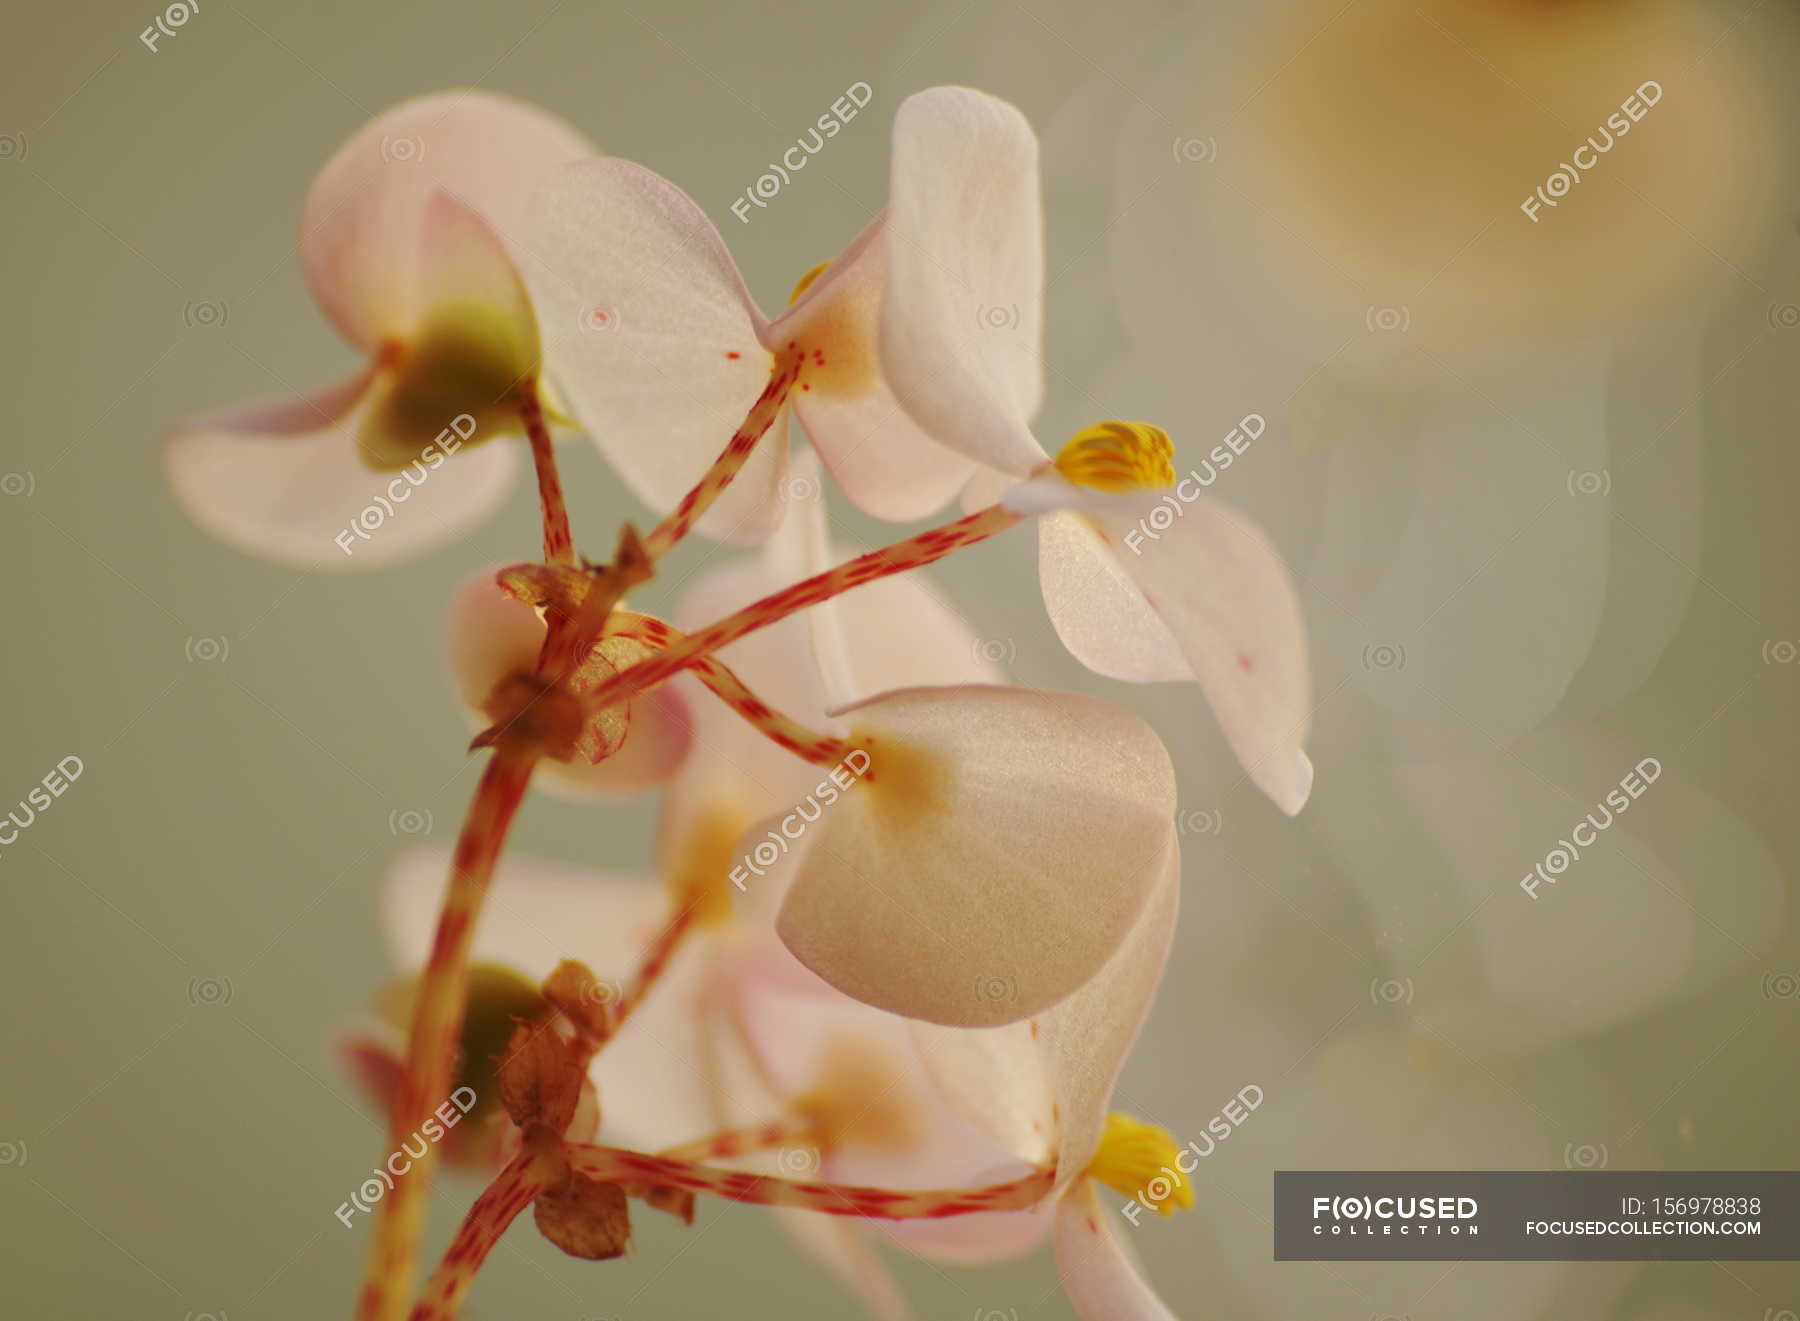 Closeup view of blooming flowers — Stock Photo | #156978838